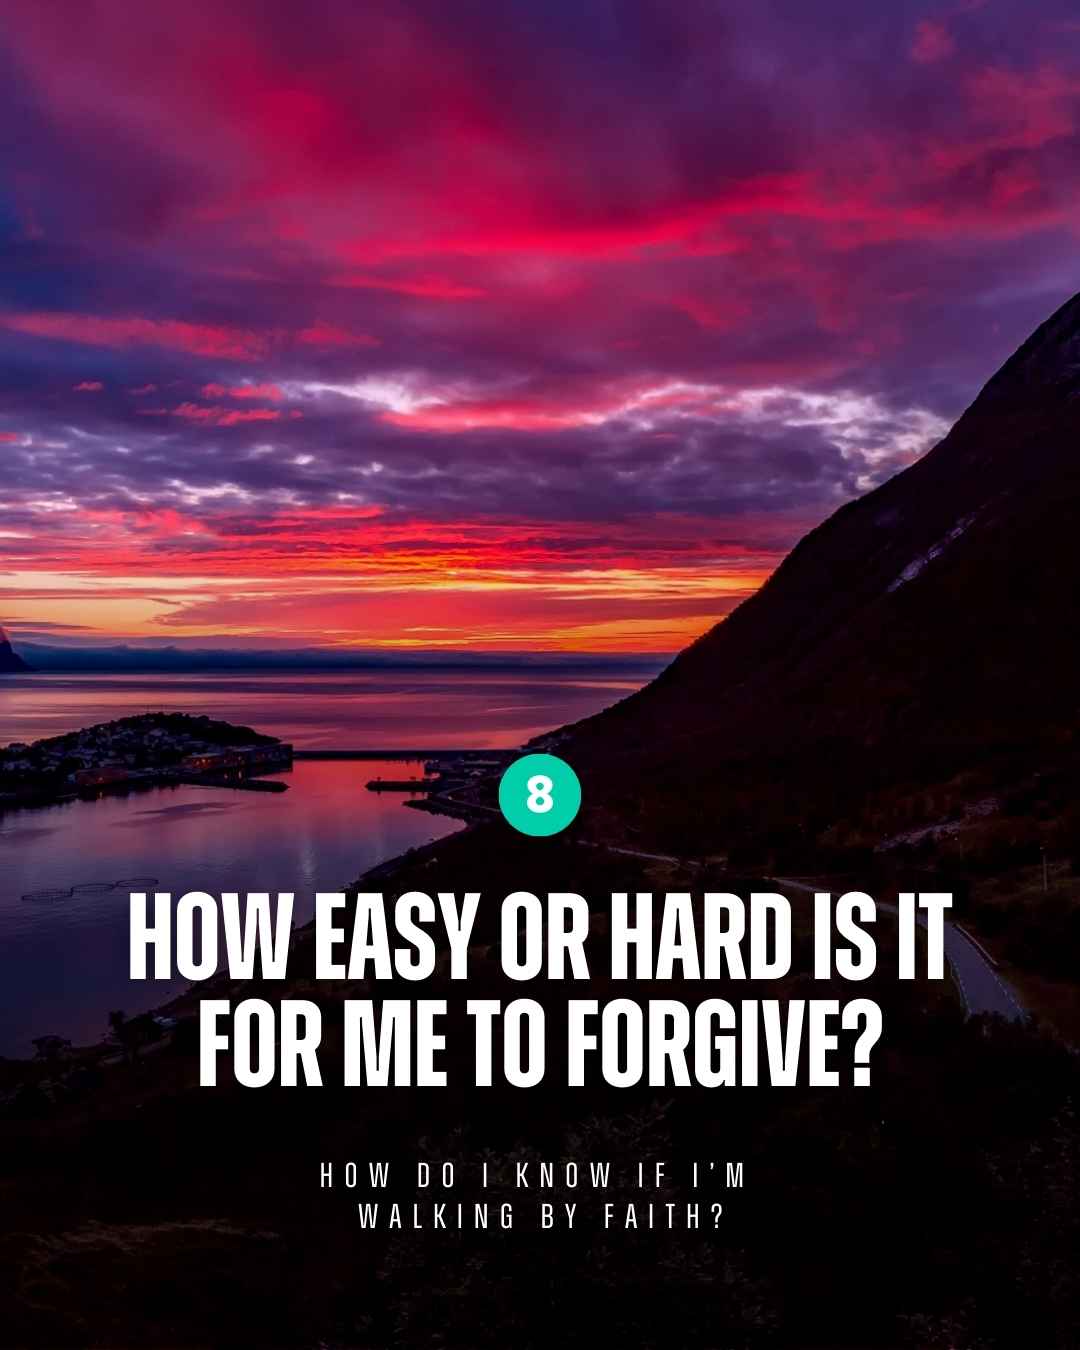 Walk with God - How easy or hard is it for me to forgive?